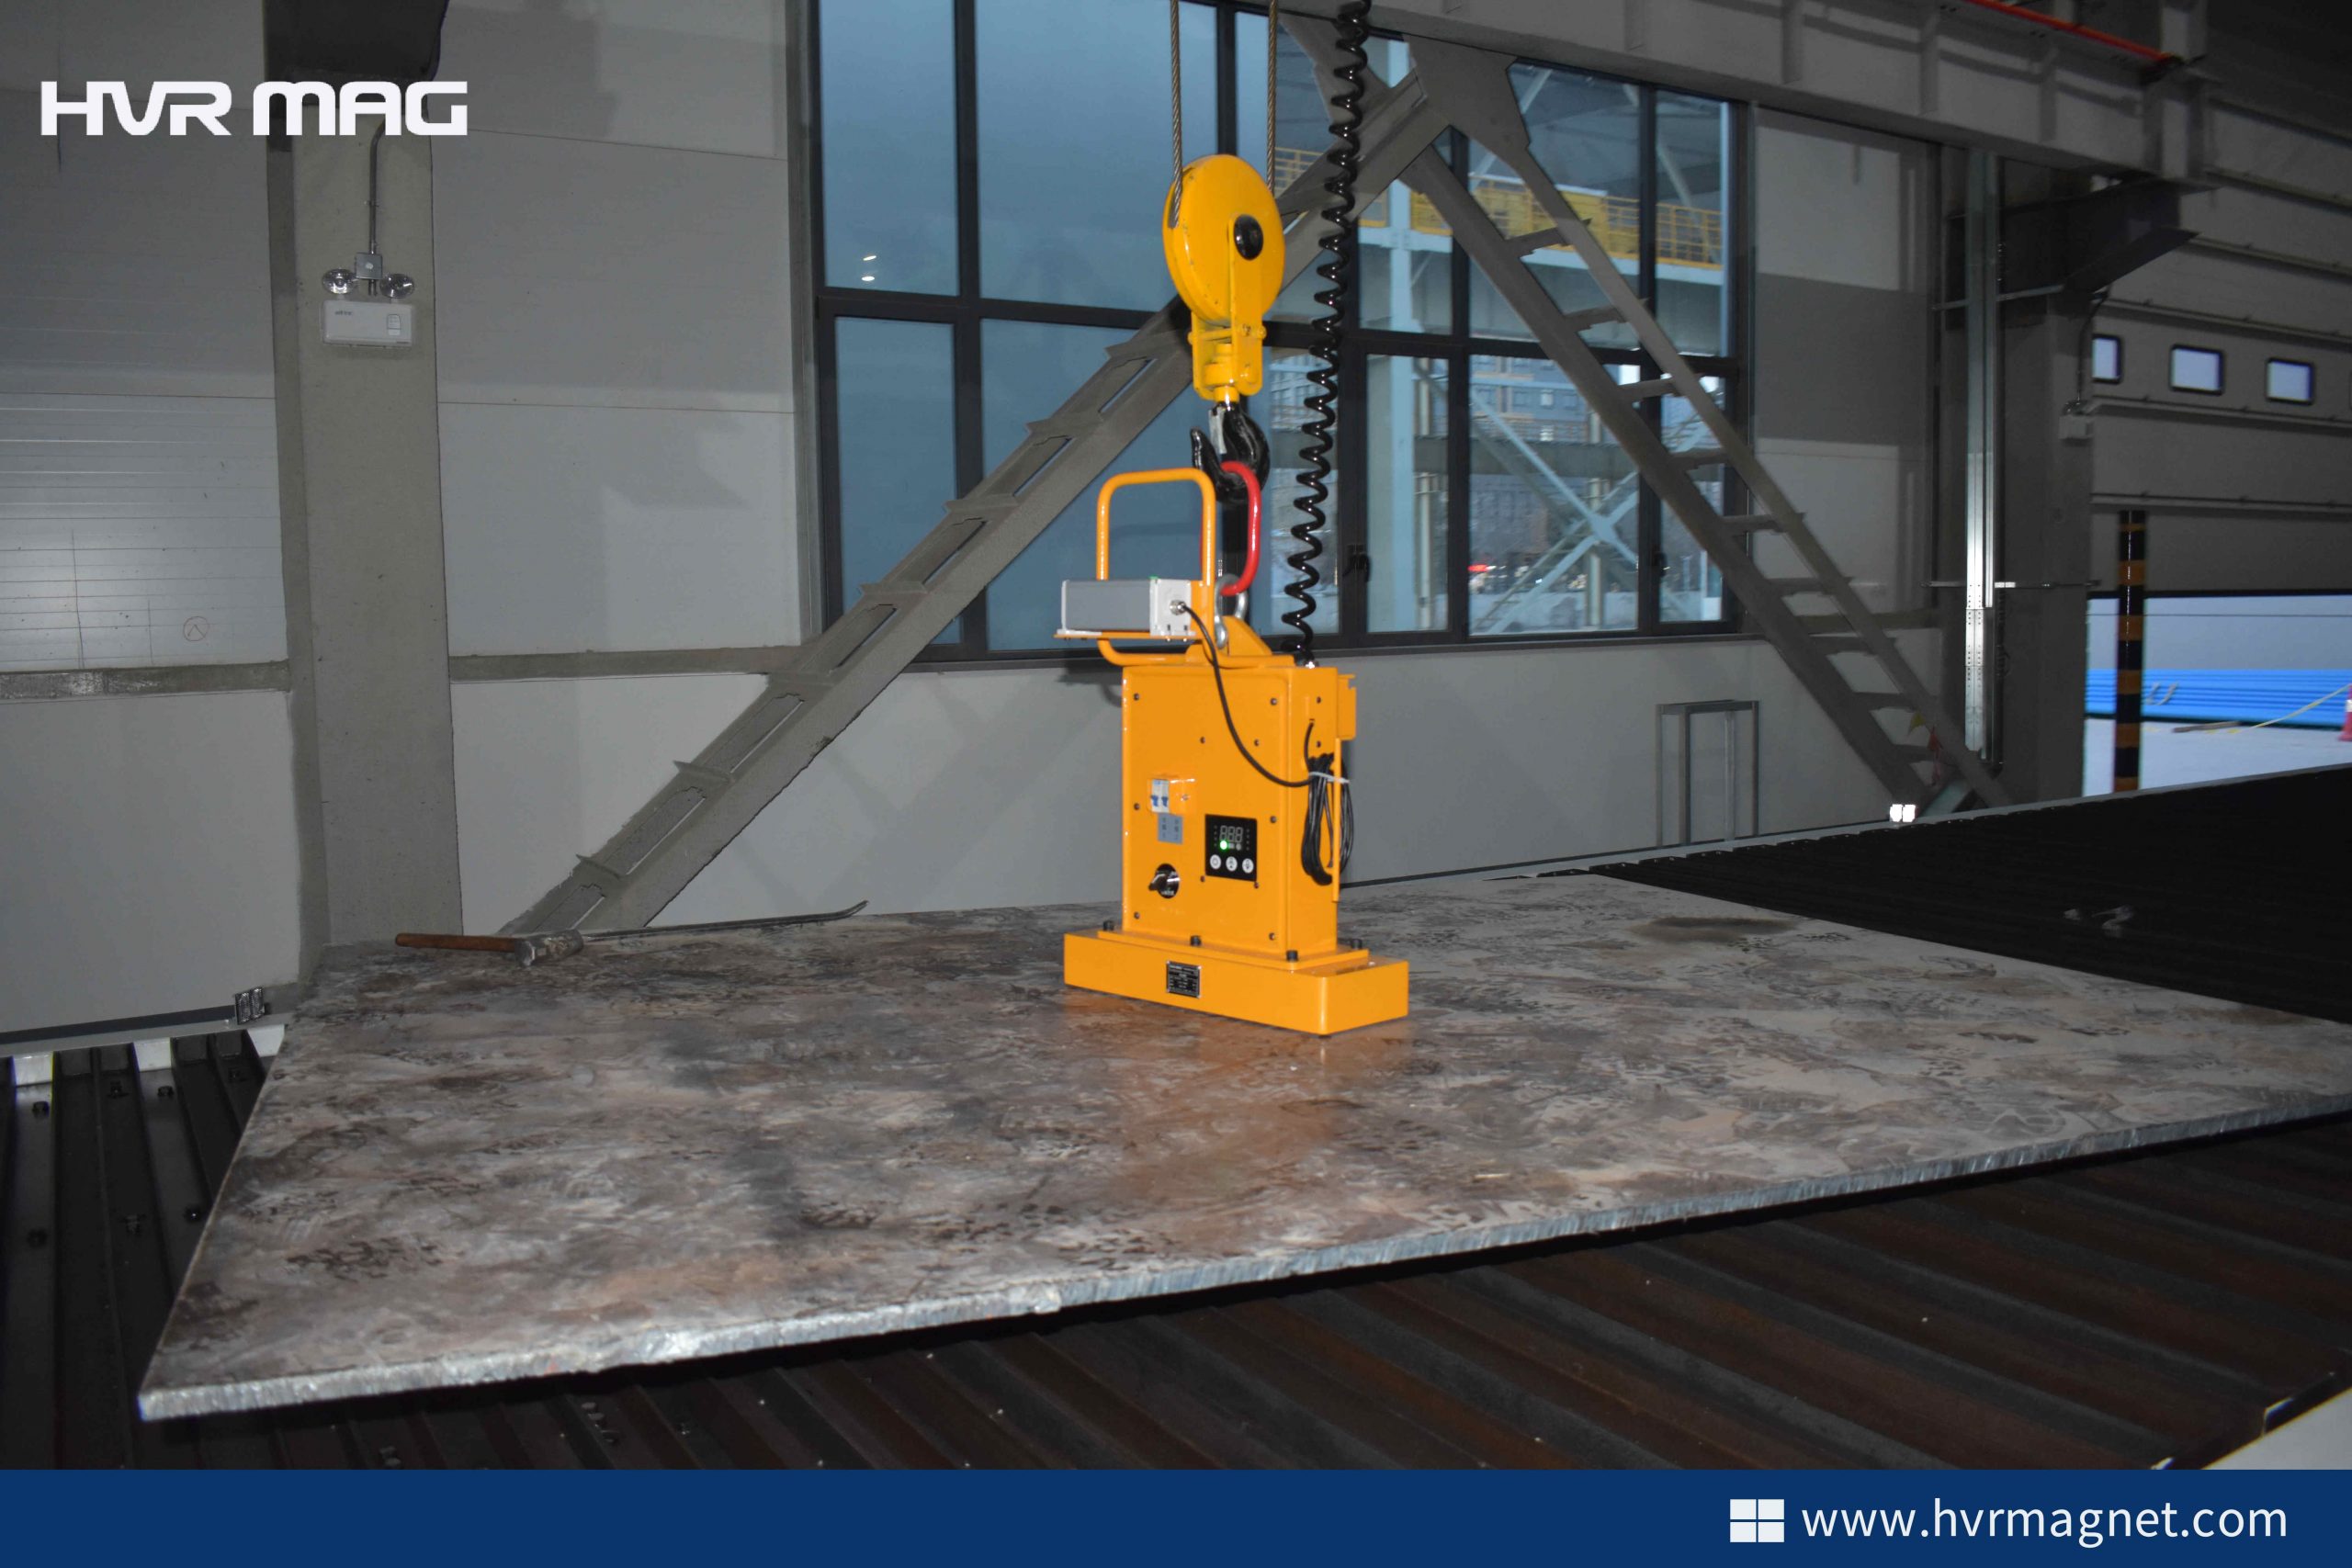 Customize Magnetic Plate Lifter to Load & Unload Steel Plate for Your Cutting Table